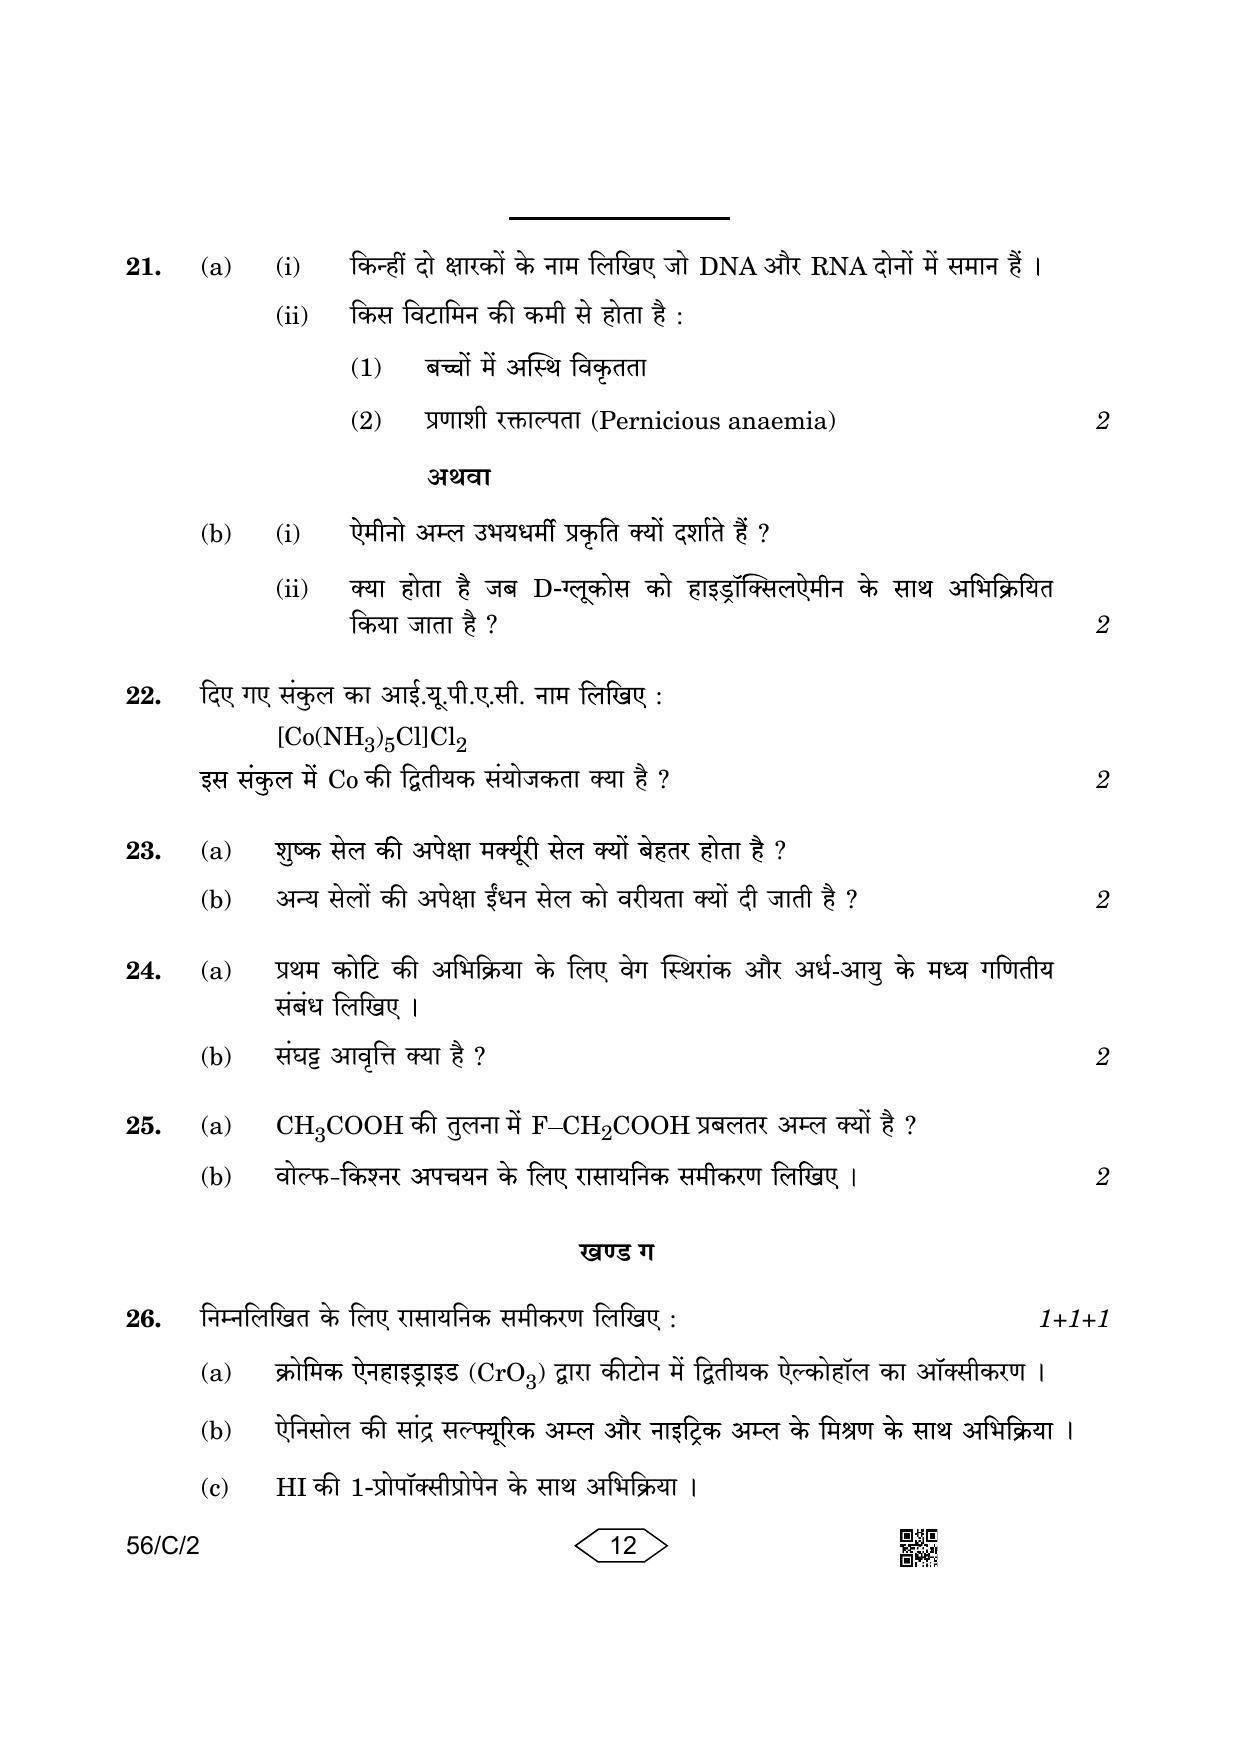 CBSE Class 12 56-2 Chemistry 2023 (Compartment) Question Paper - Page 12